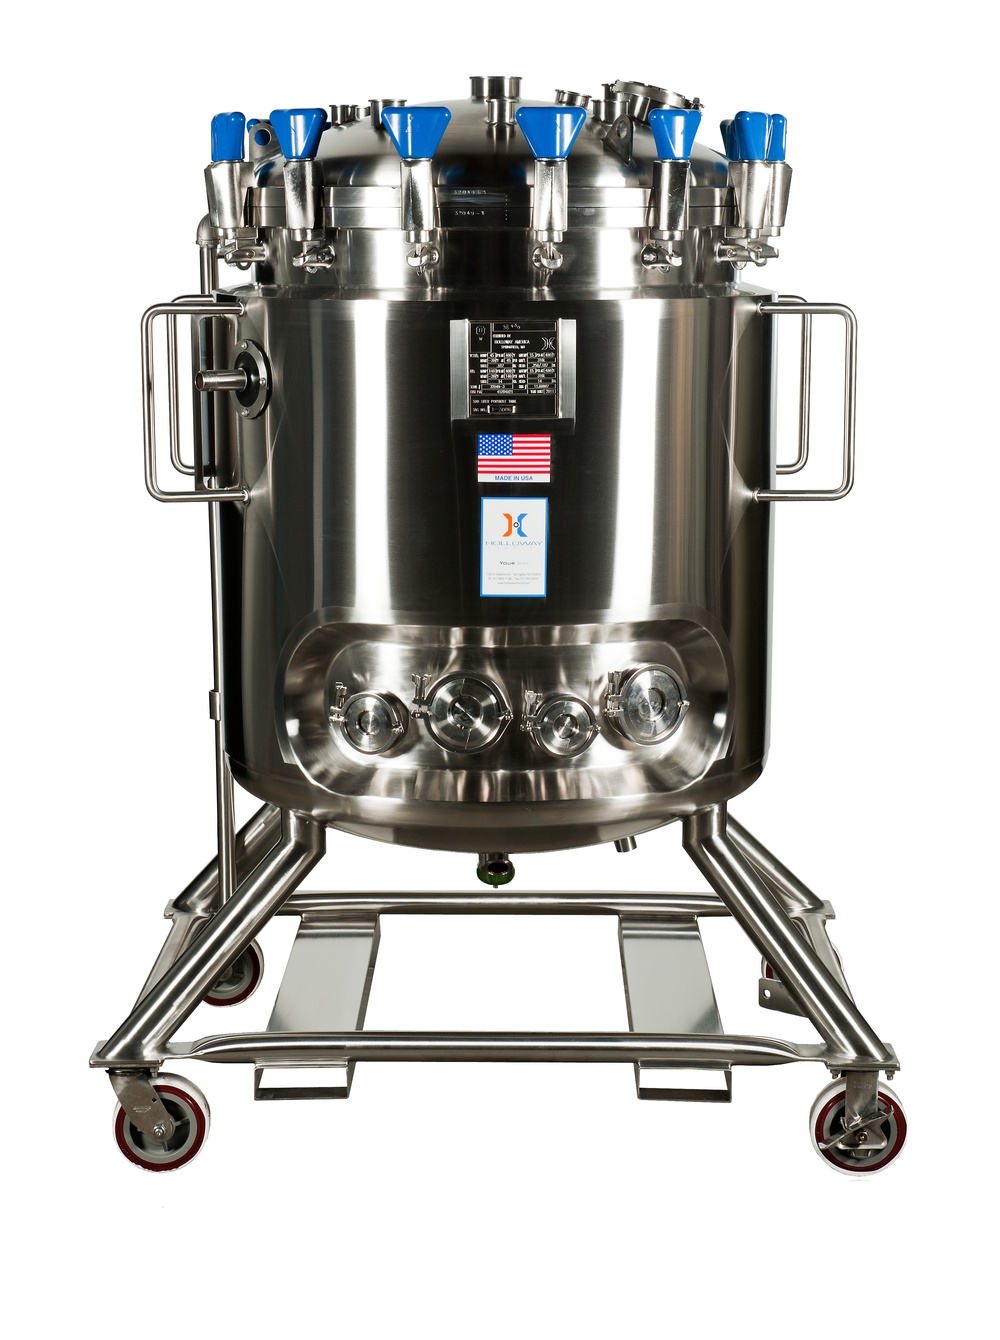 This vertical vessel for the laboratory is among innovative portable pressure vessels by Holloway.